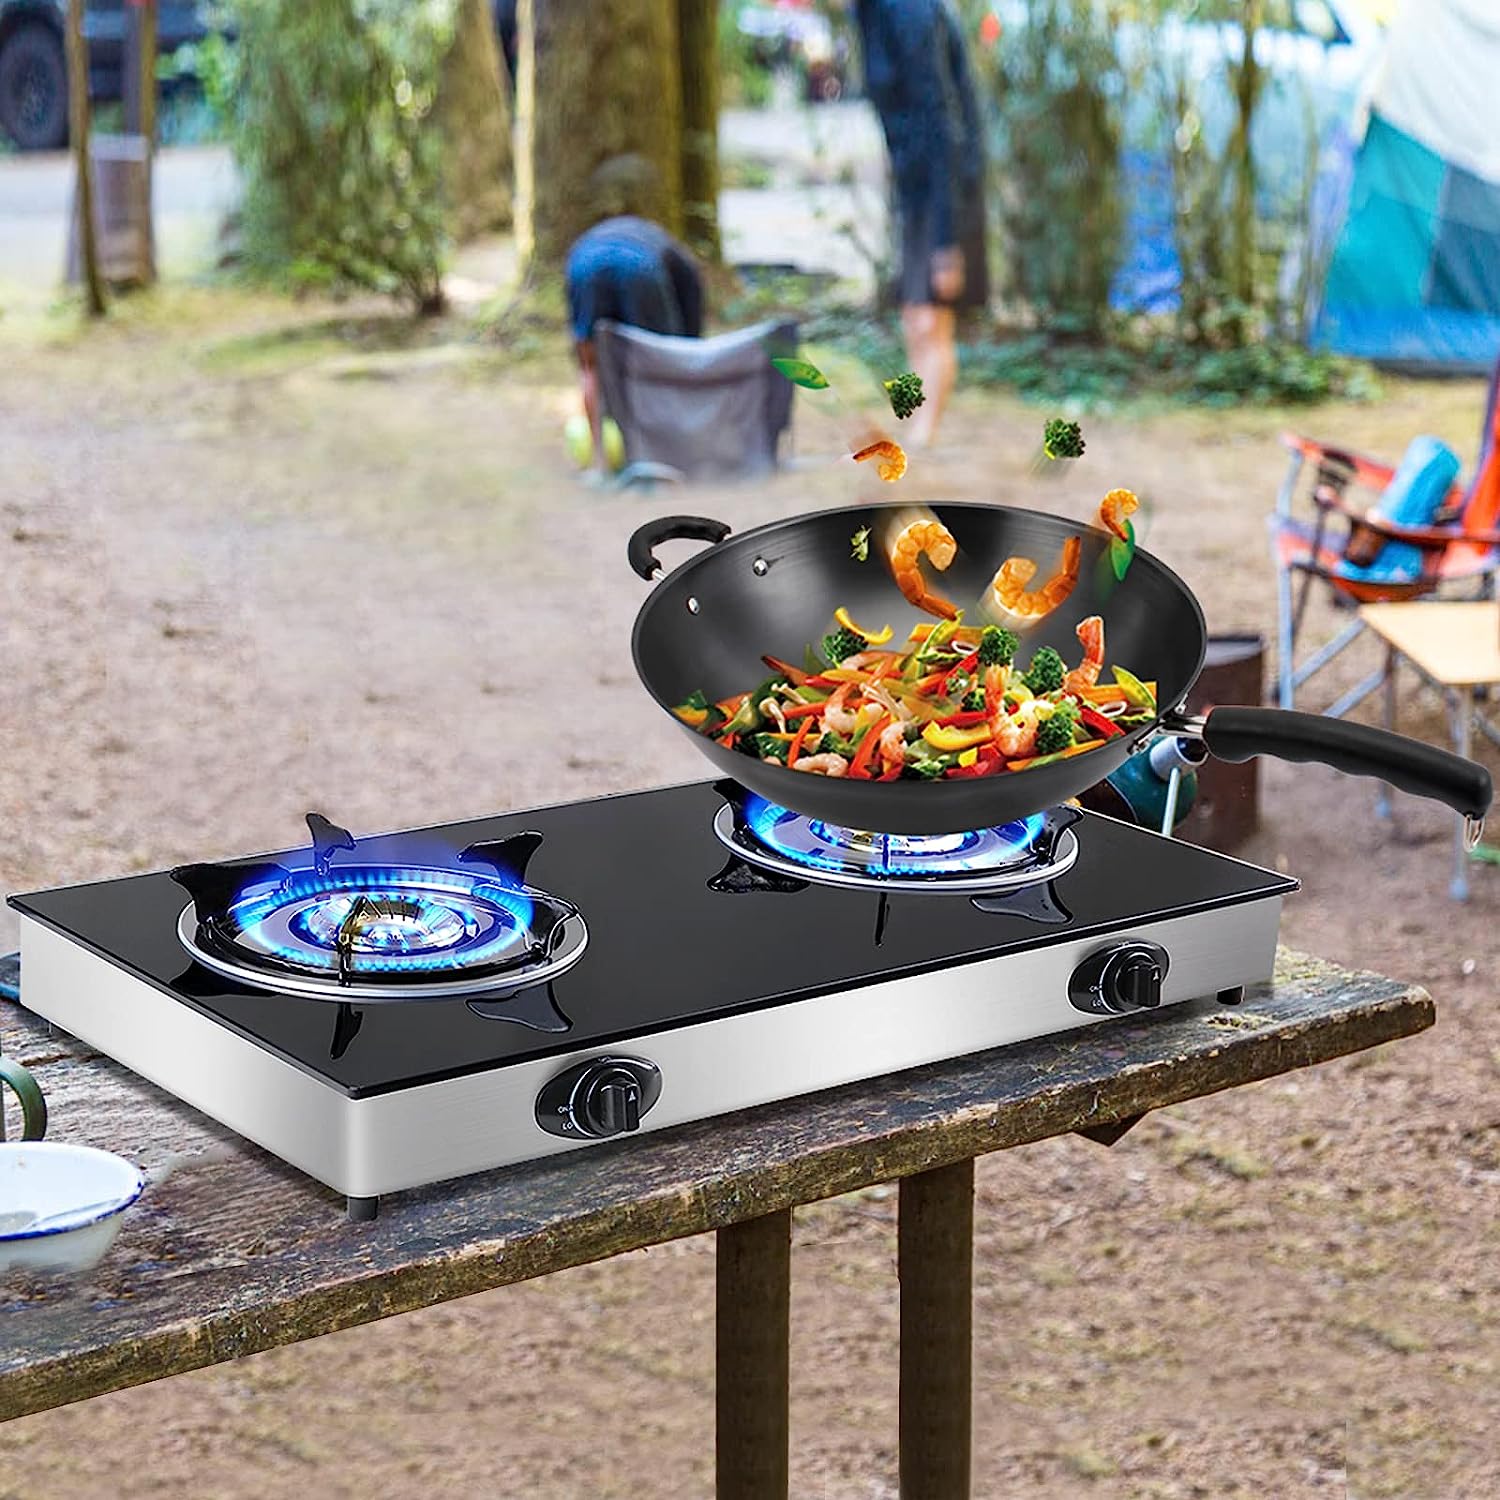 https://discounttoday.net/wp-content/uploads/2023/06/Forimo-Propane-Gas-Cooktop-2-Burners-Stove-portable-gas-stove-Tempered-Glass-Double-Auto-Ignition-Camping-Burner-LPG-for-RV-Apartments-Outdoor-6.jpg